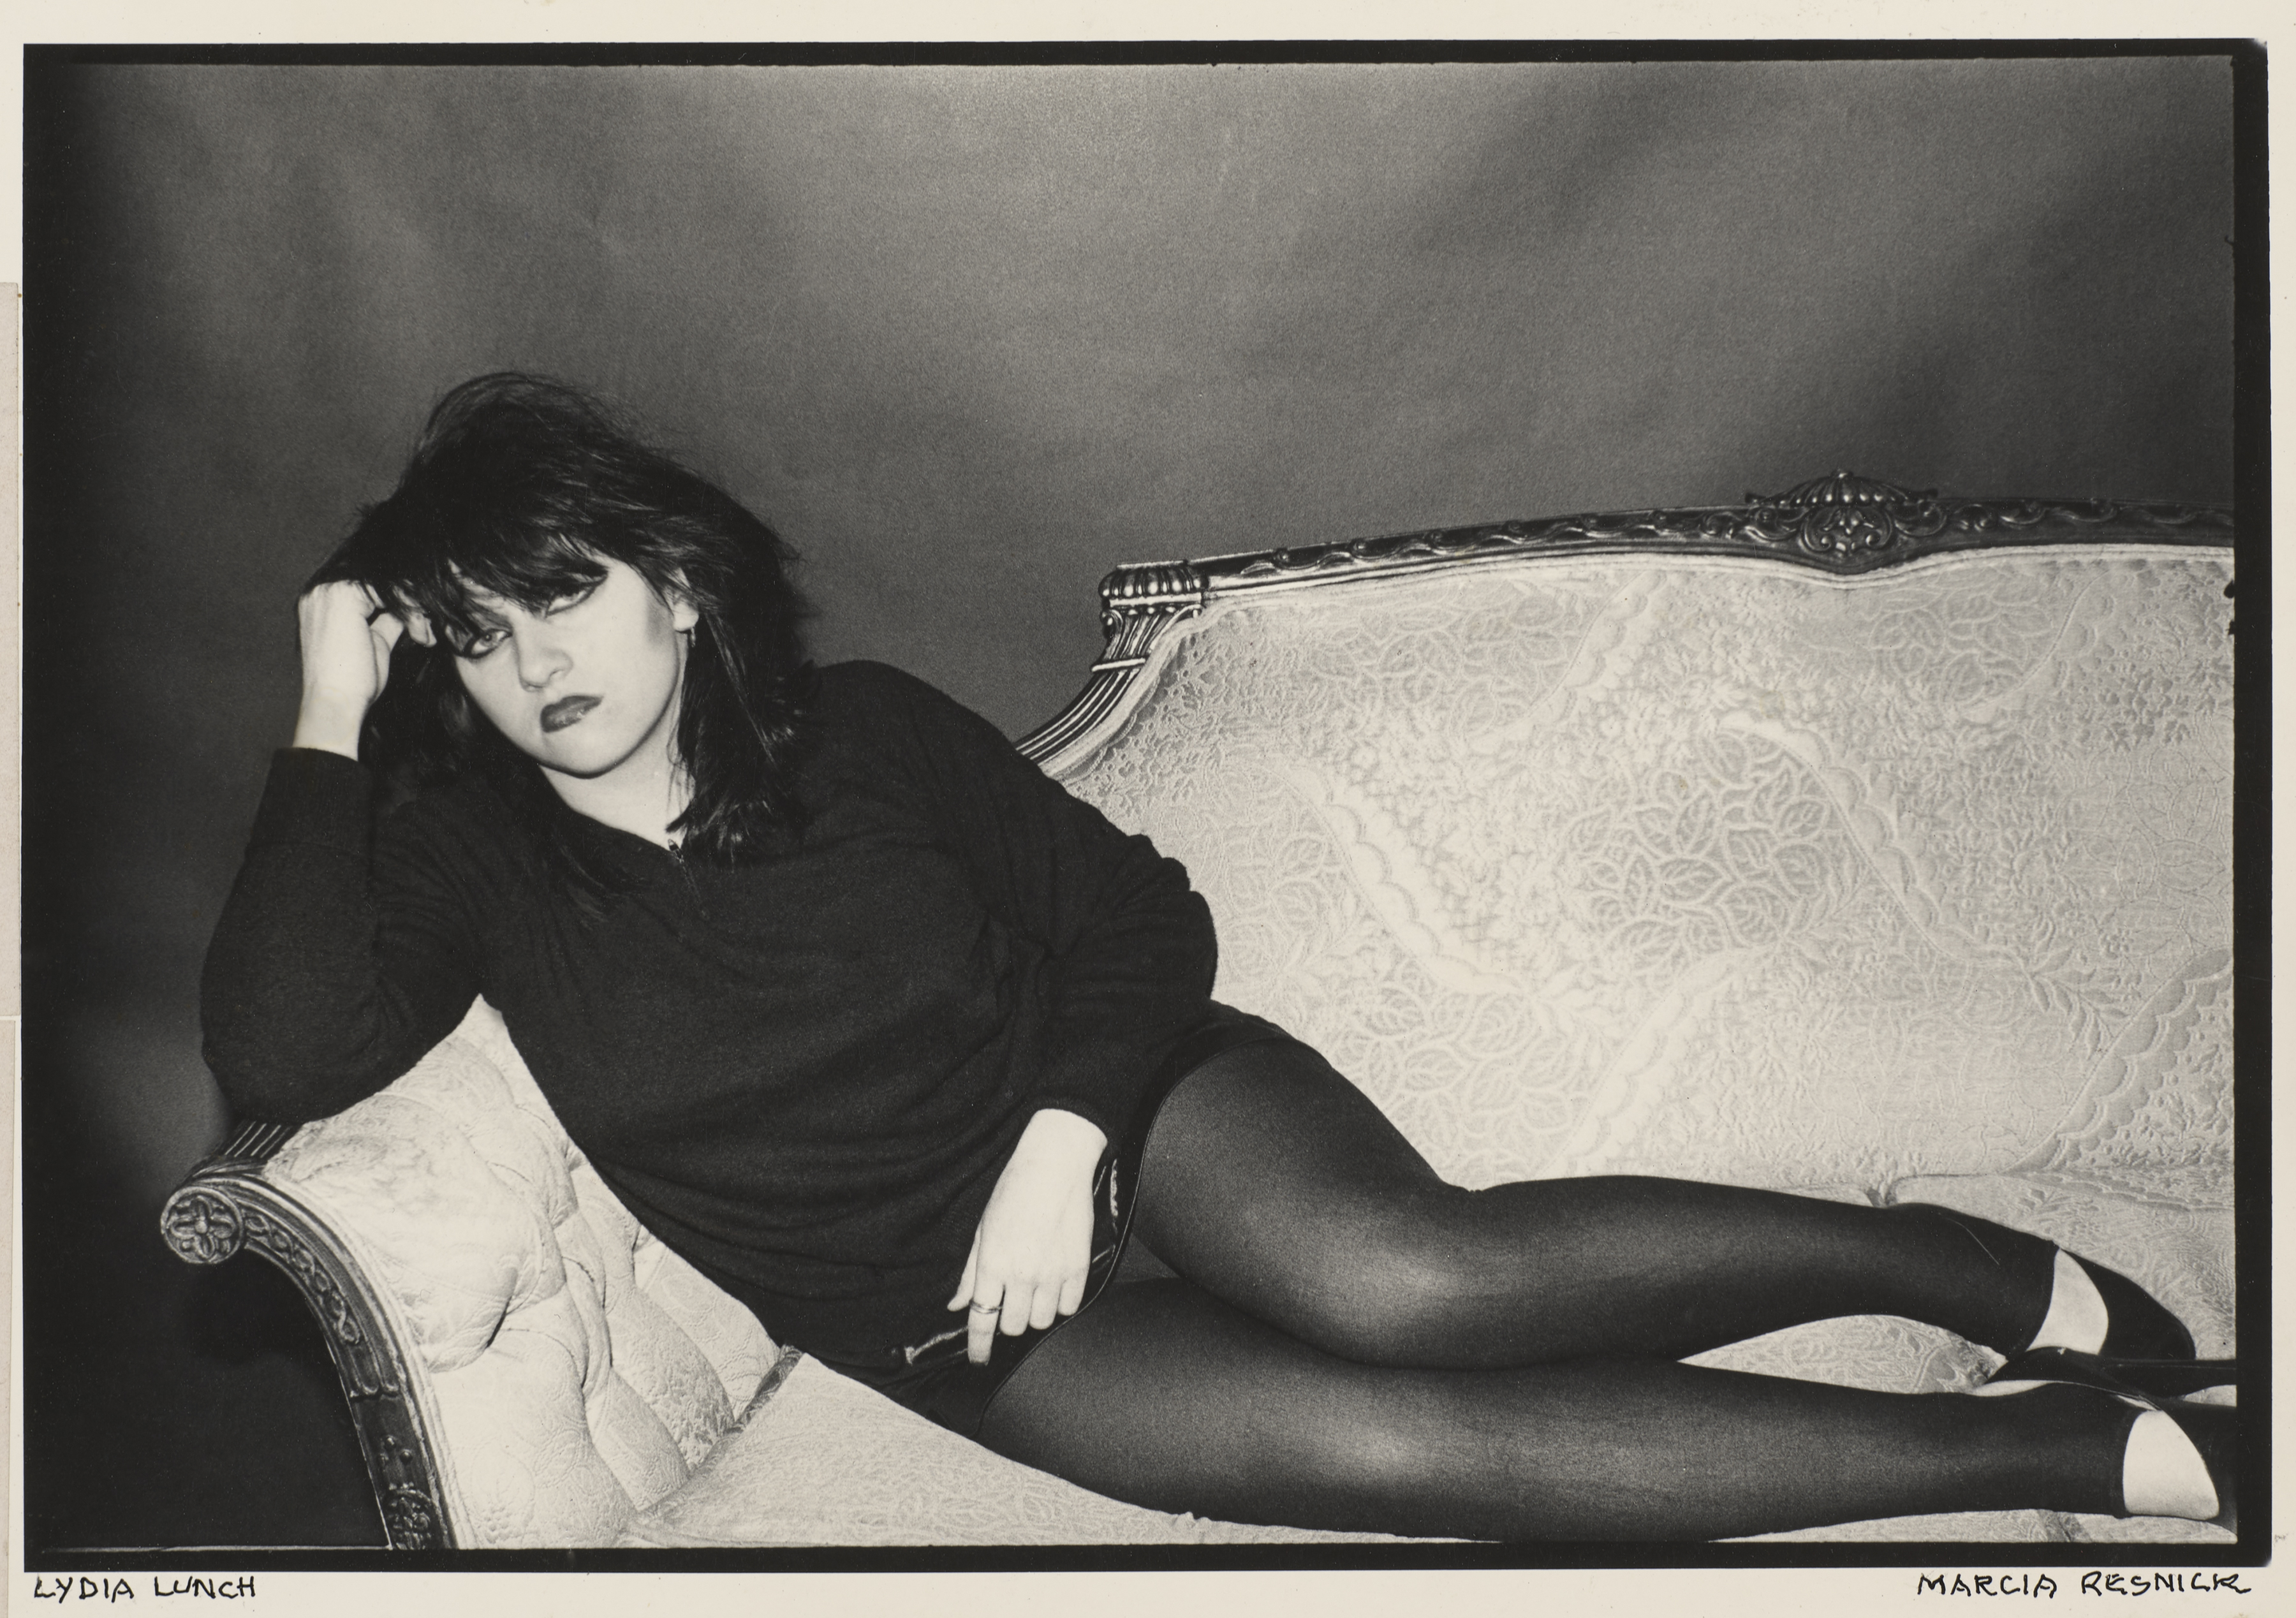 Photograph of Lydia Lunch lying on a chase lounge photographed by Marcia Resnick.